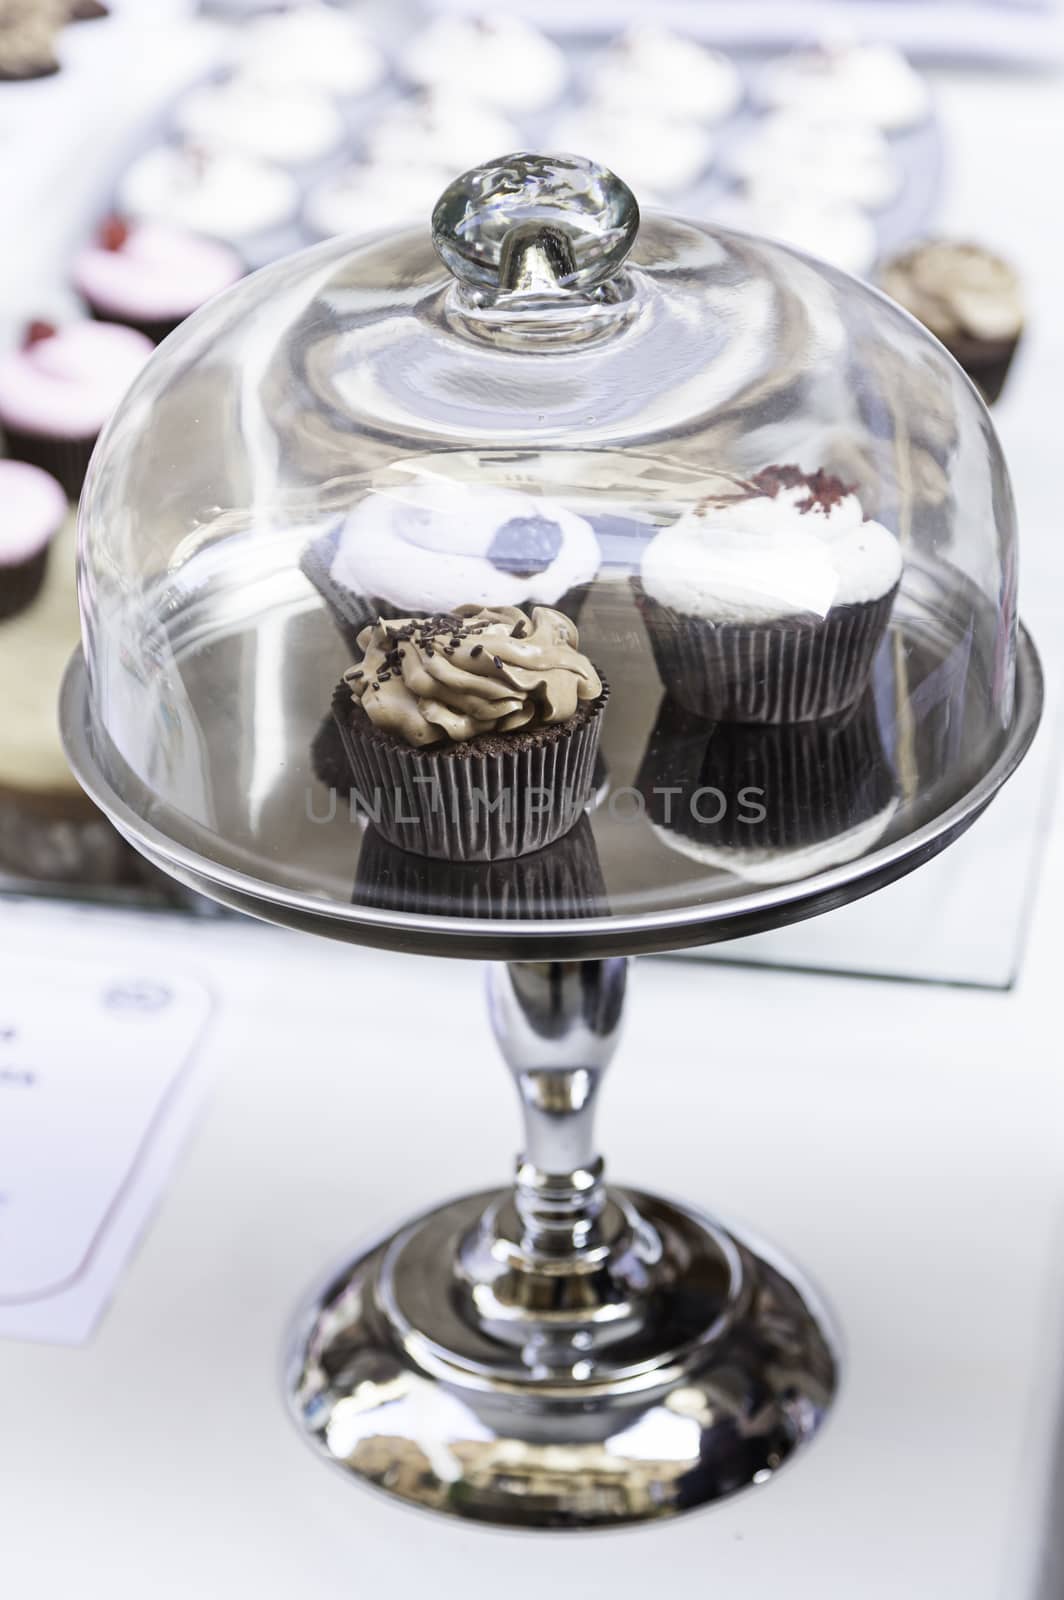 Homemade cupcakes in a glass by esebene